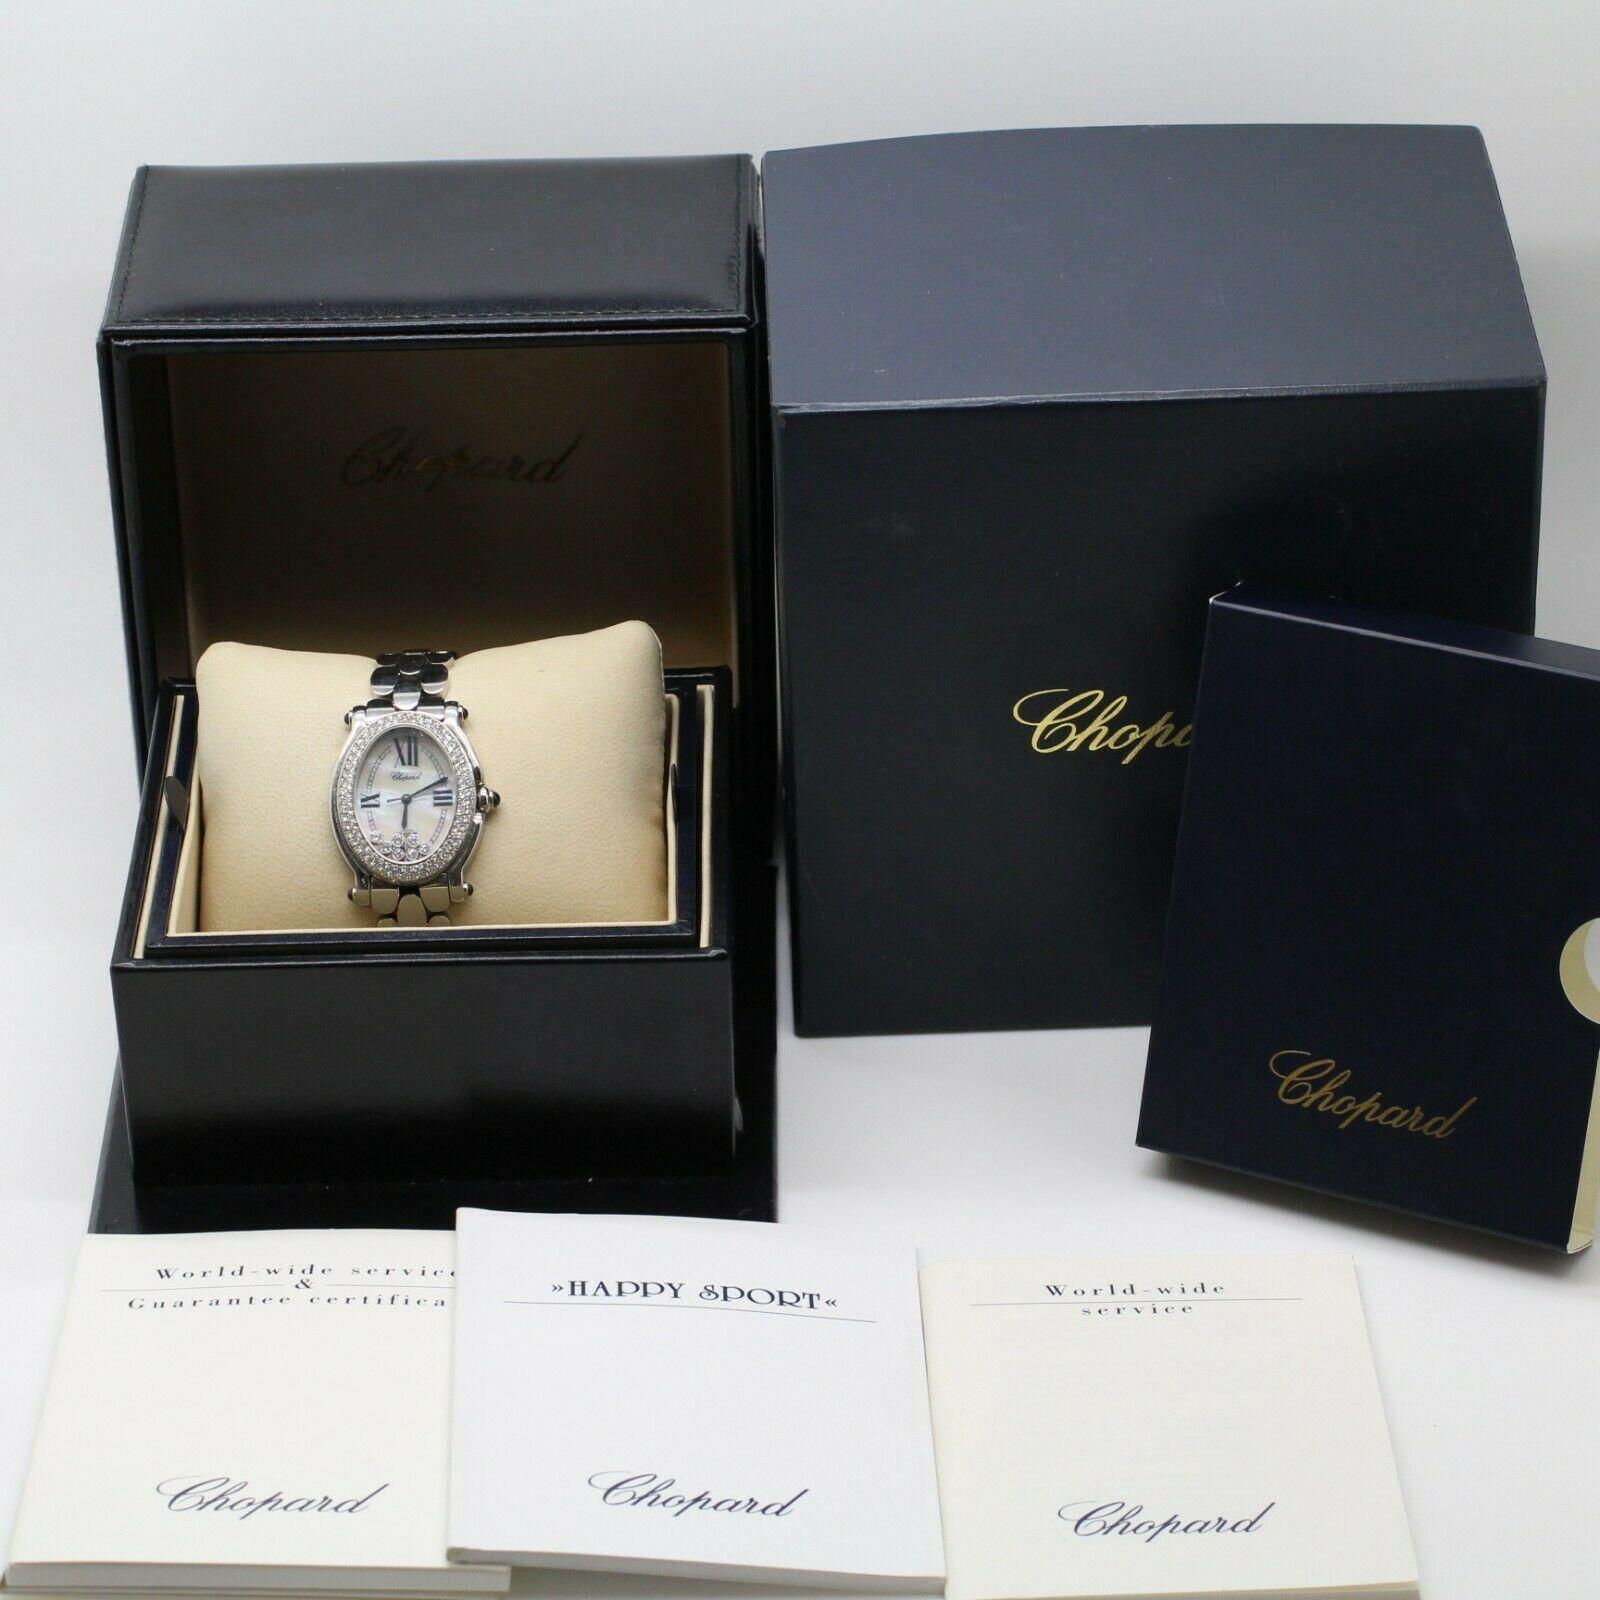 Modern Chopard Oval Diamond and Stainless Steel Watch